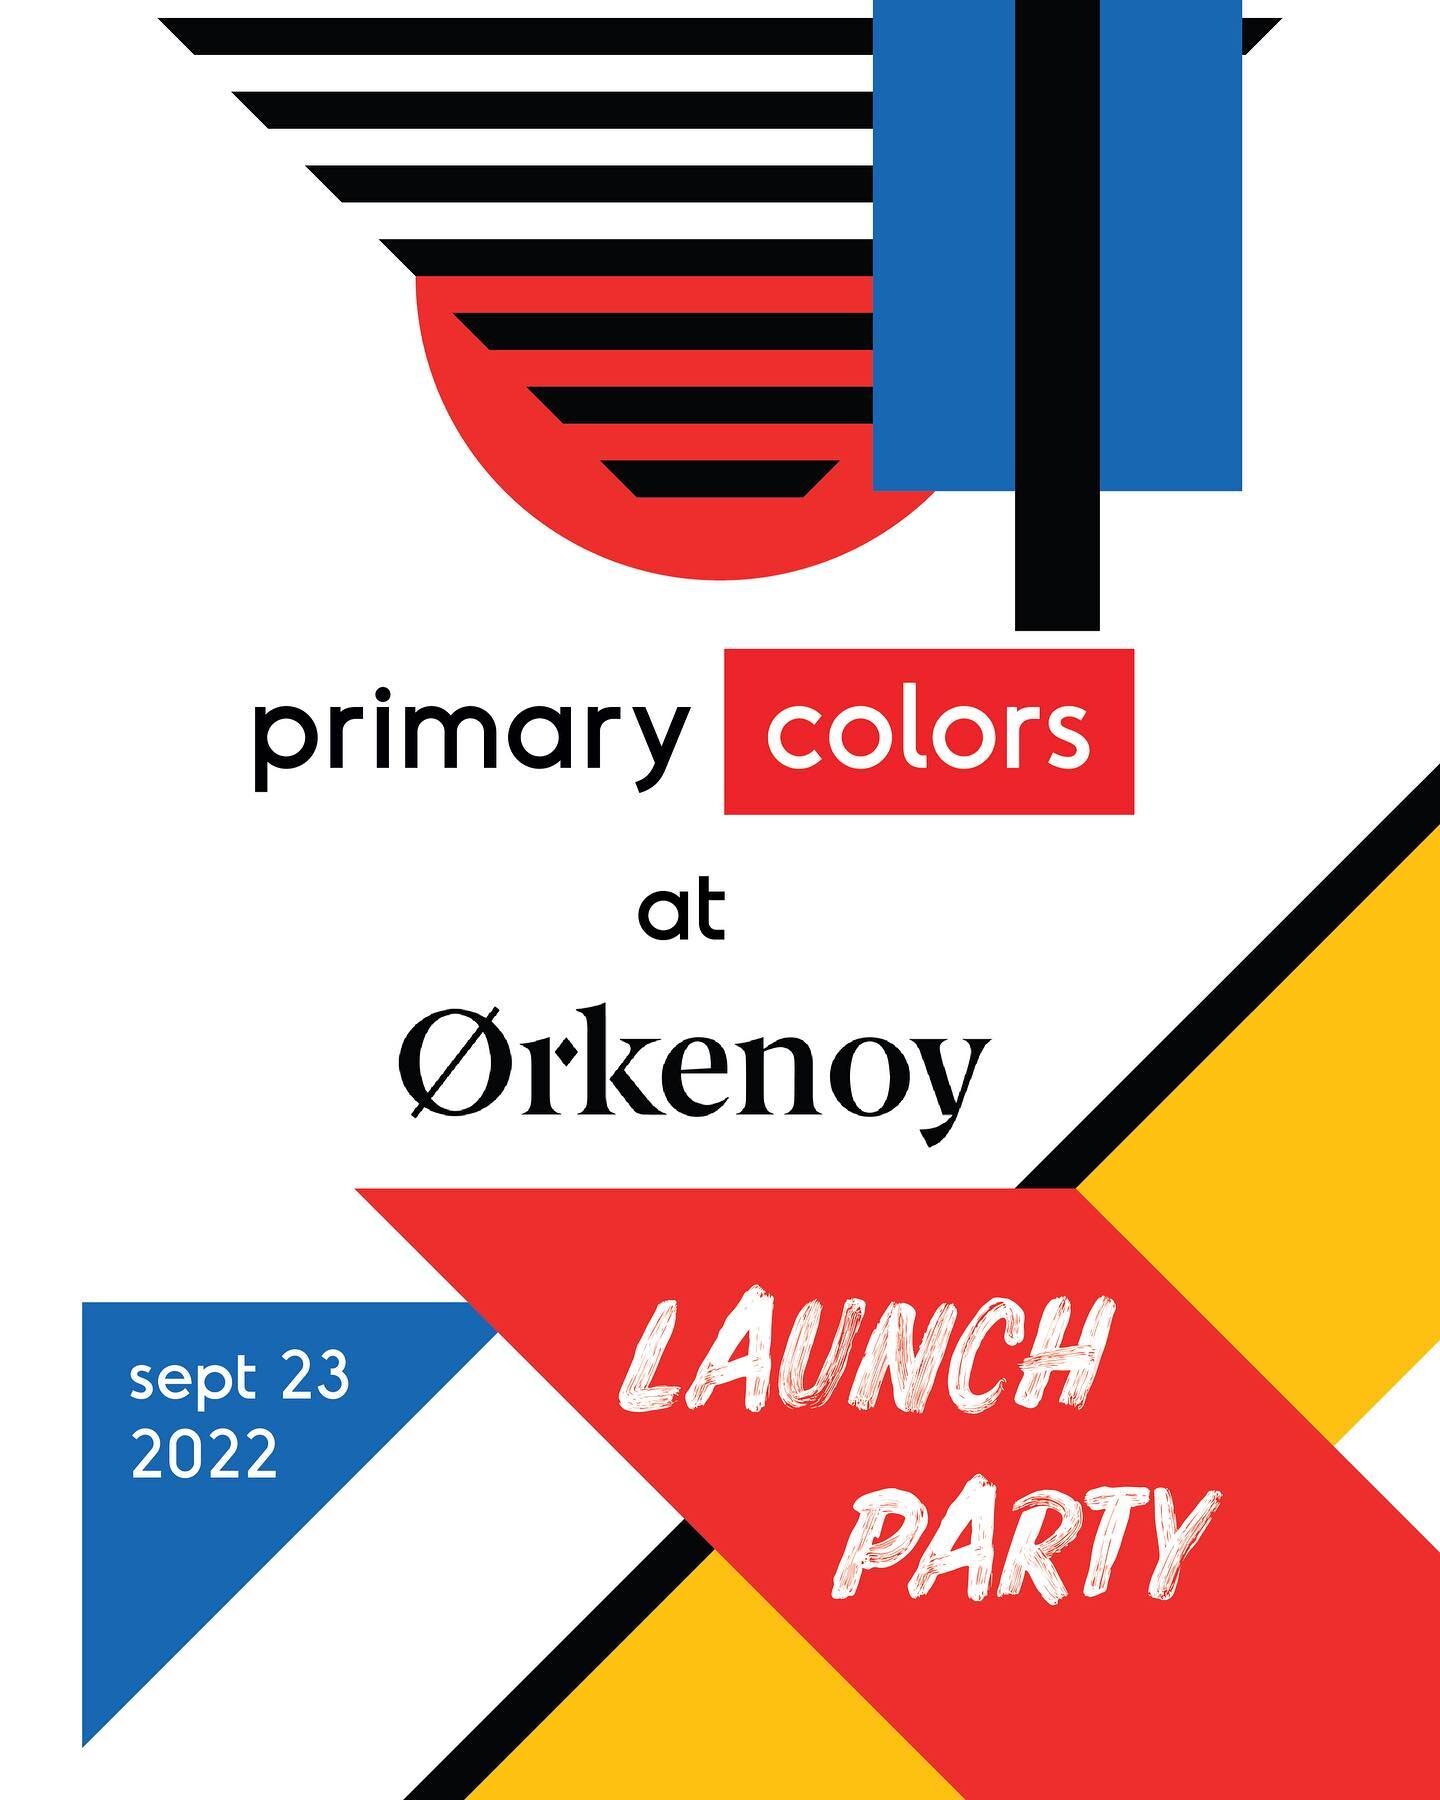 One week till our launch party 🚀🎉

Come hang @orkenoy next Friday Sept 23rd after 5pm to celebrate our new home 🏠&nbsp;Get excited for:

🍻&nbsp;3x Primary Colors blends on tap
🍹&nbsp;A one-time, special beer cocktail
🥘&nbsp;Orkenoy food with be